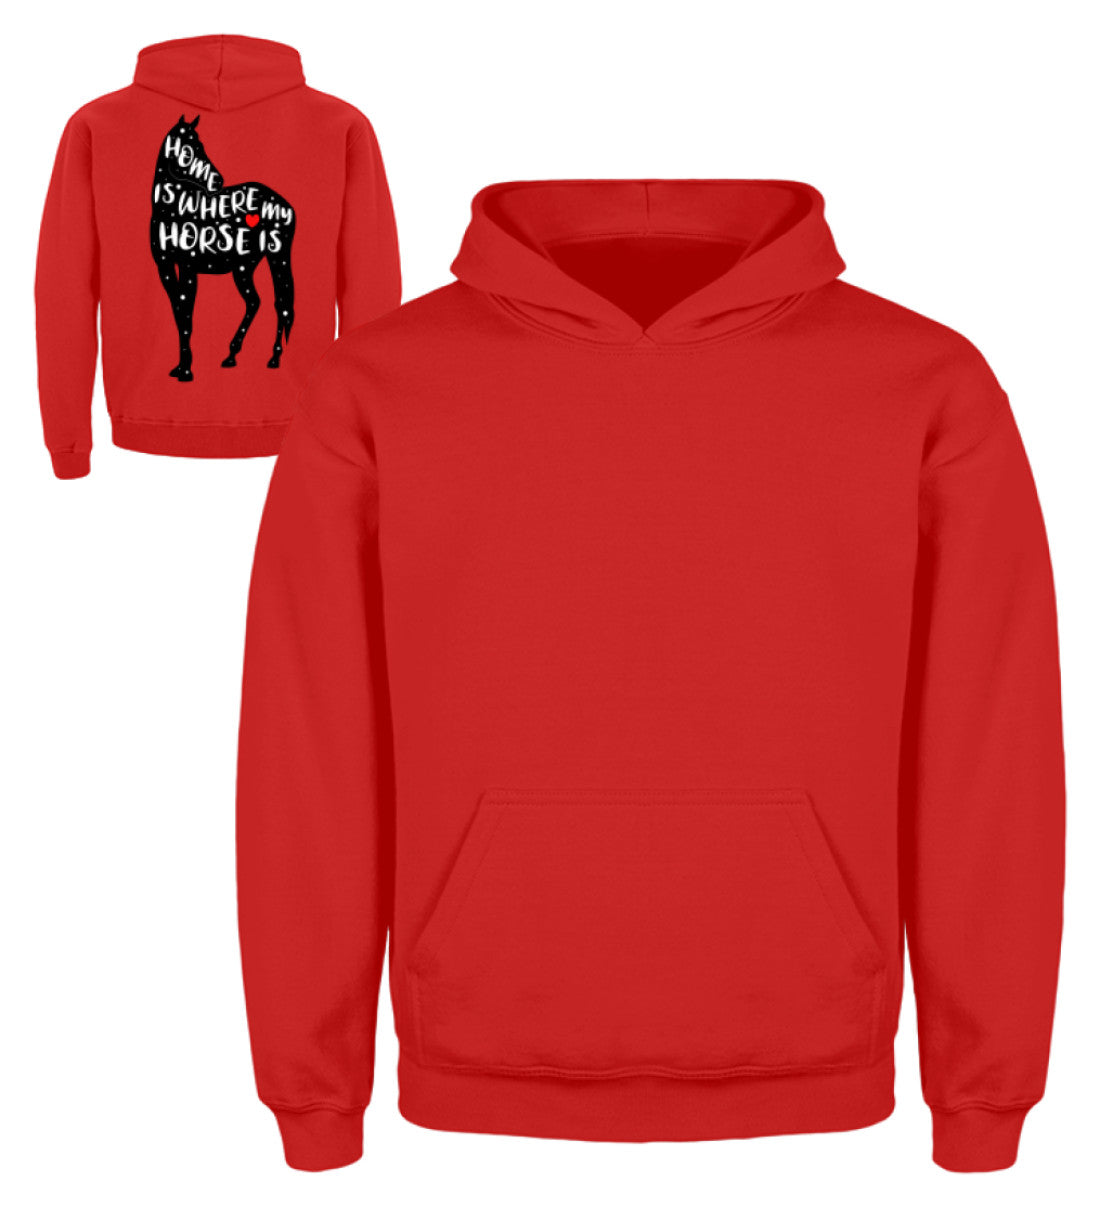 Zeigt funny adorable horse saying kinder hoodie in Farbe Feuerrot